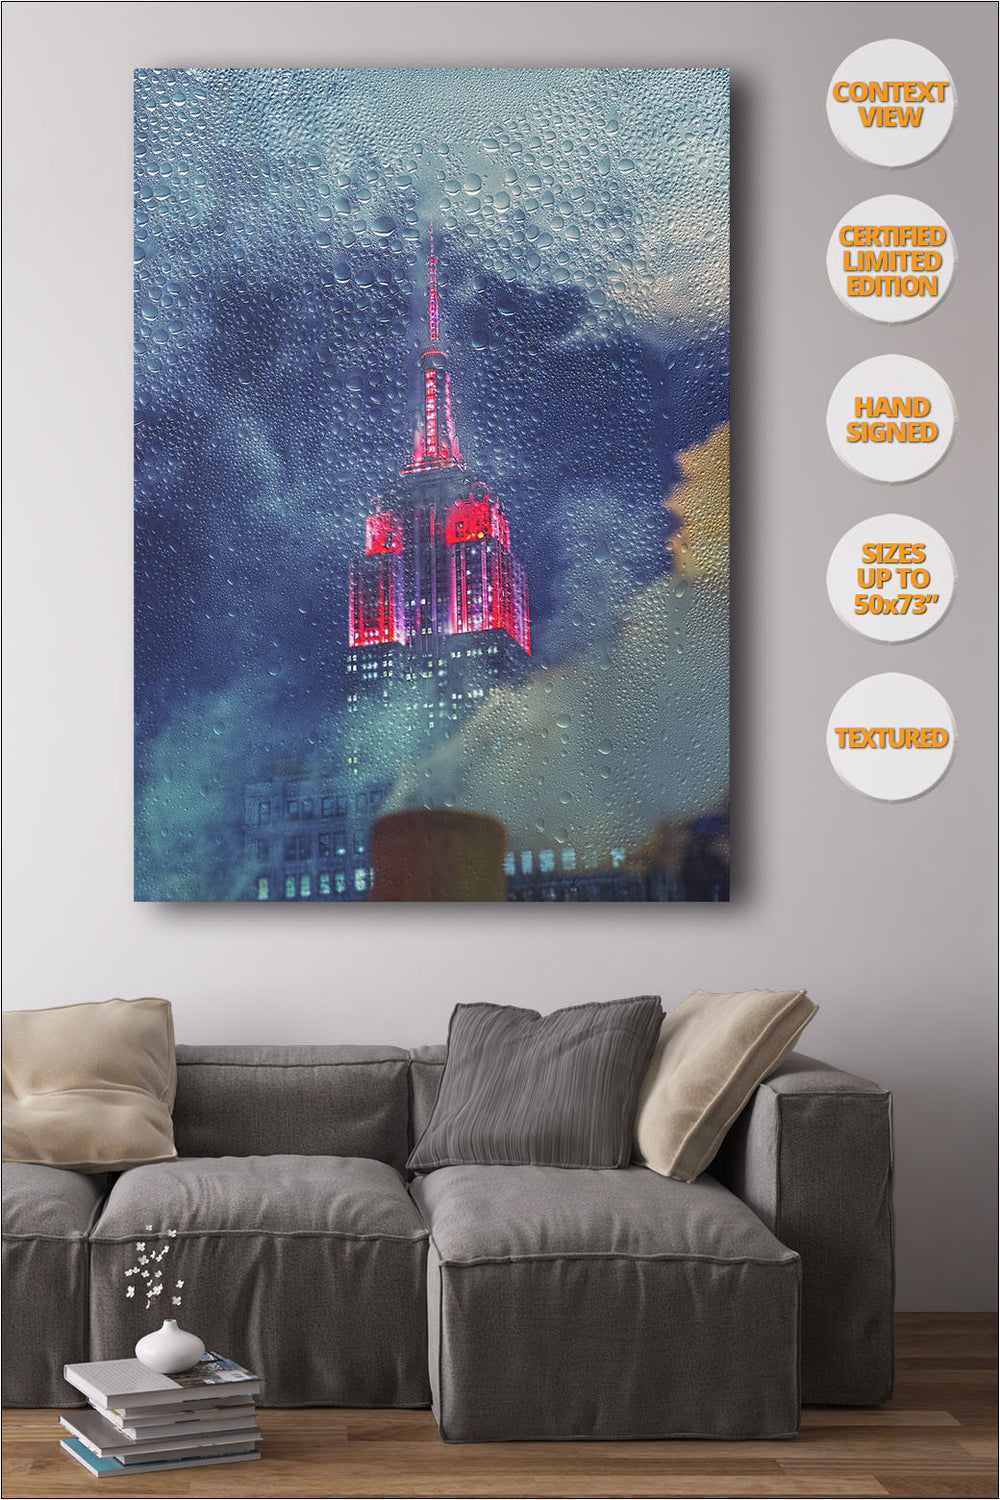 The Empire State by night, New York. | Print hanged in living room.